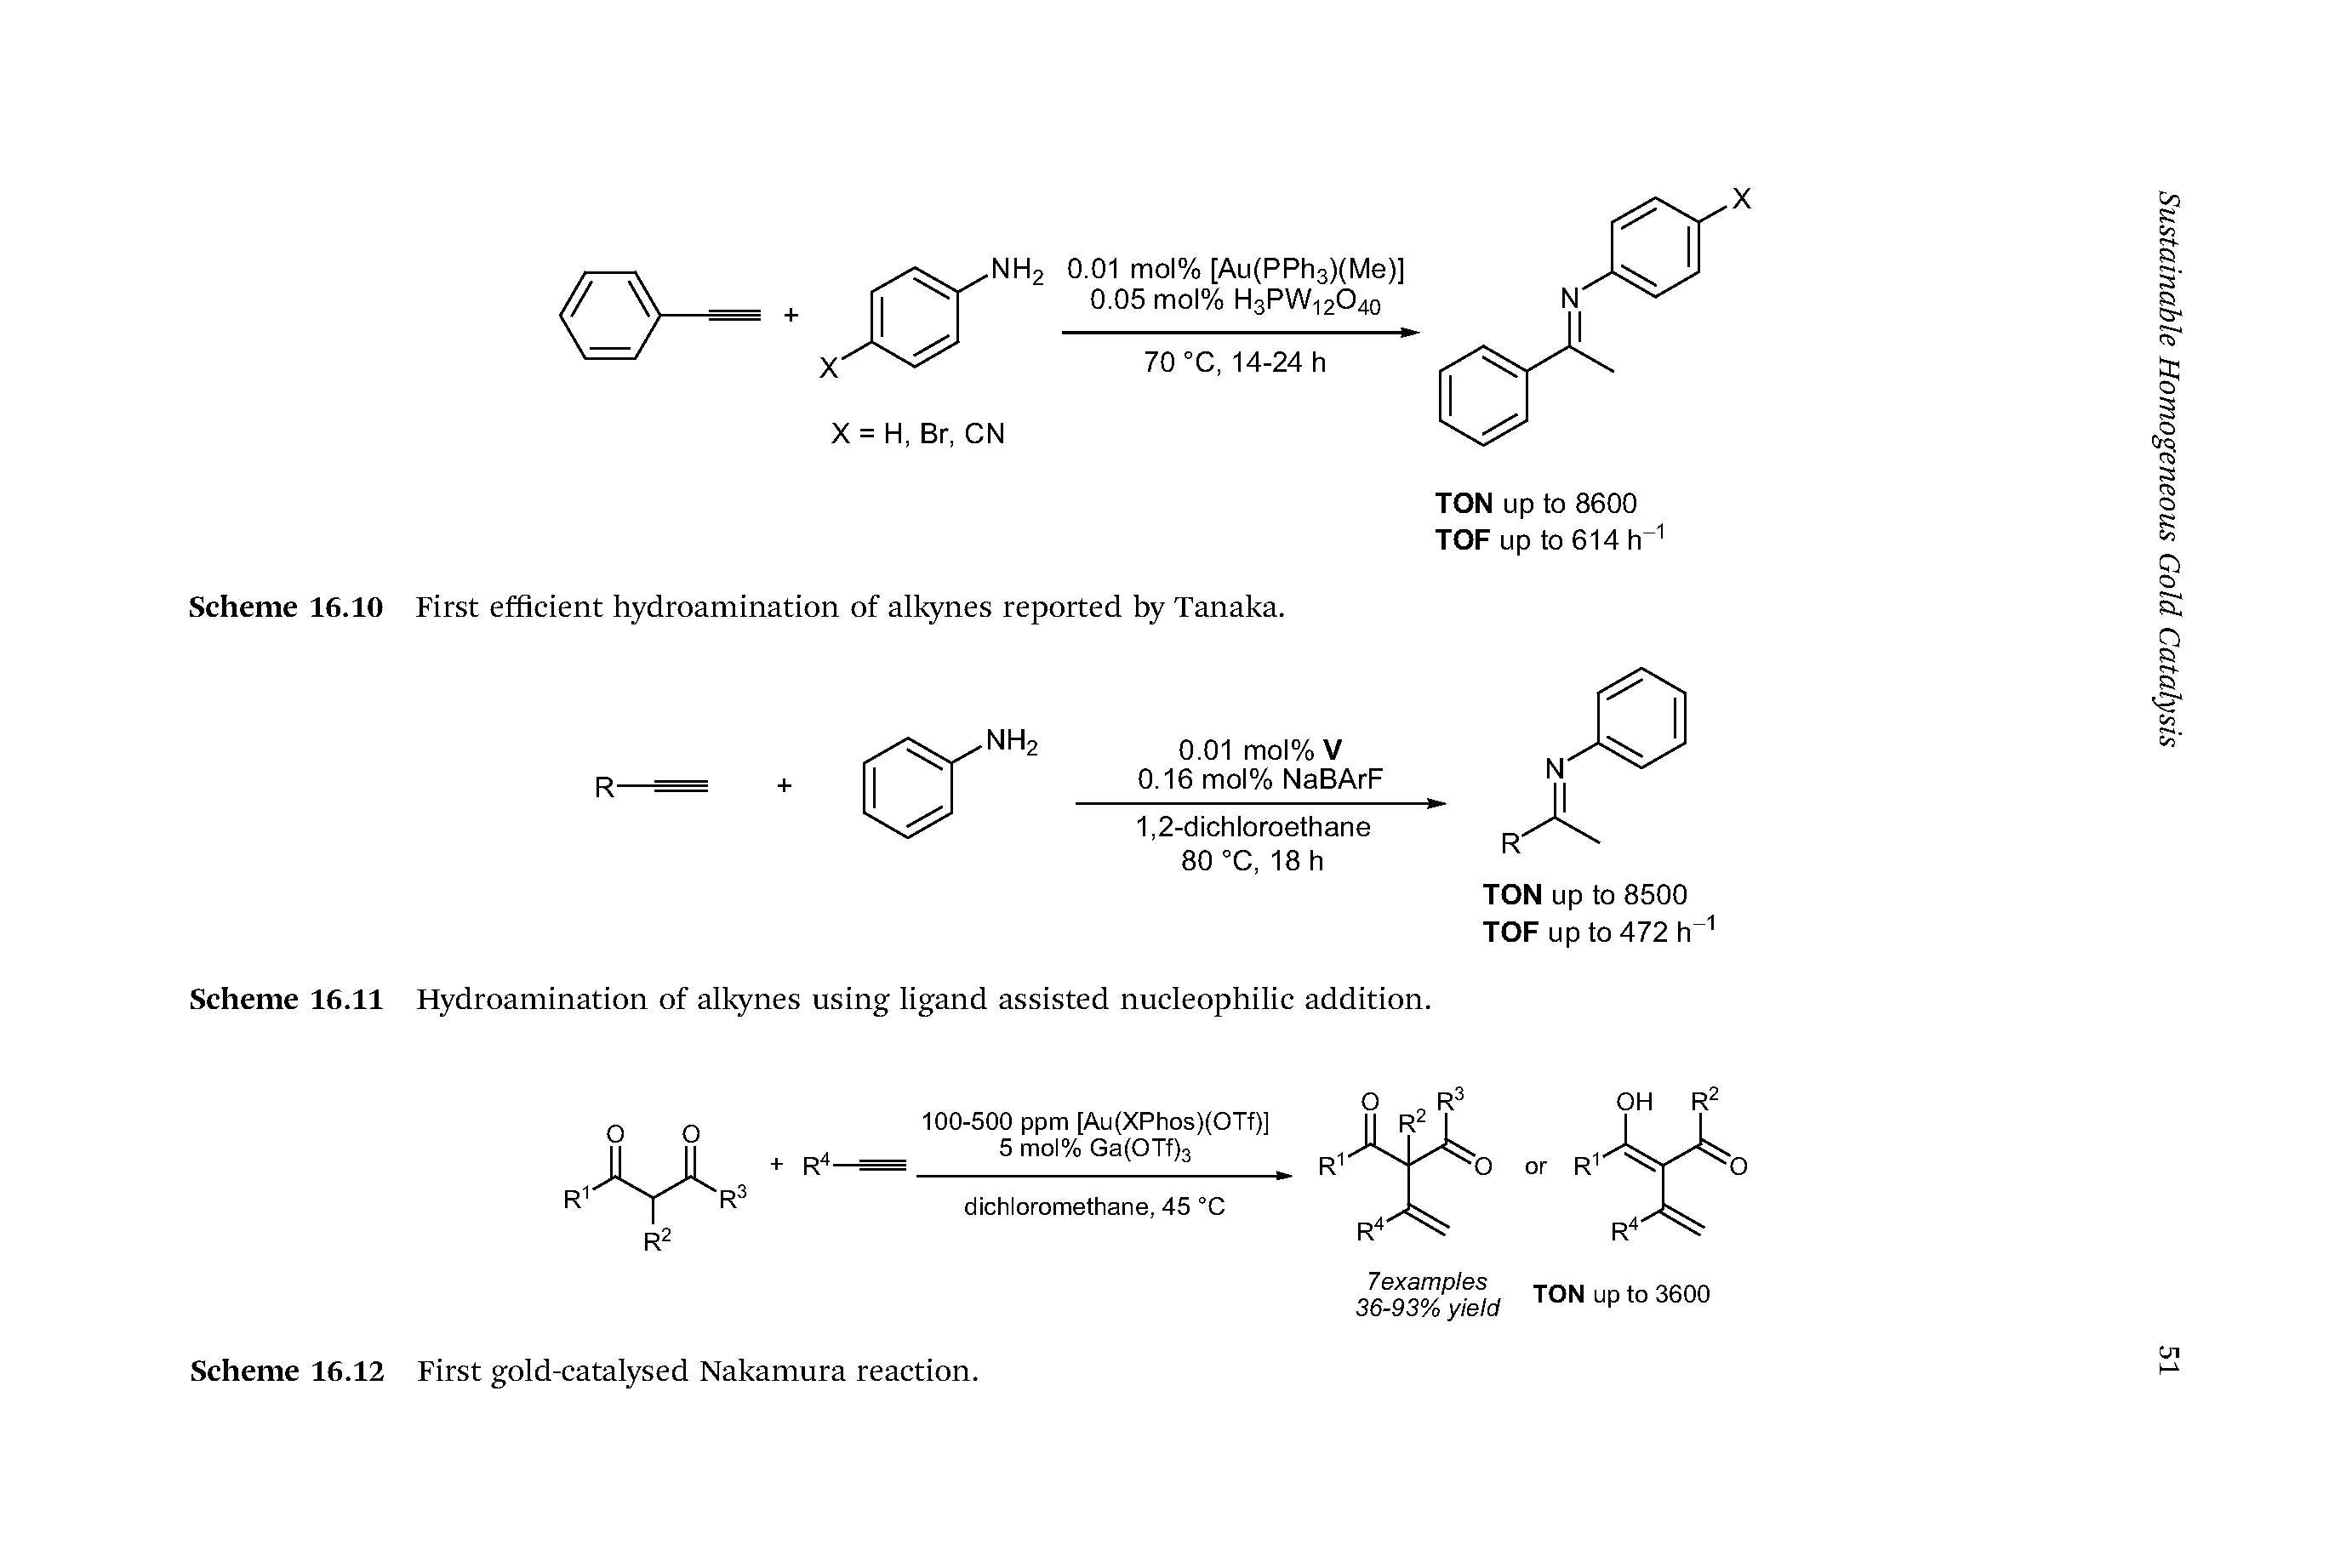 Scheme 16.11 Hydroamination of alkynes using ligand assisted nucleophilic addition.